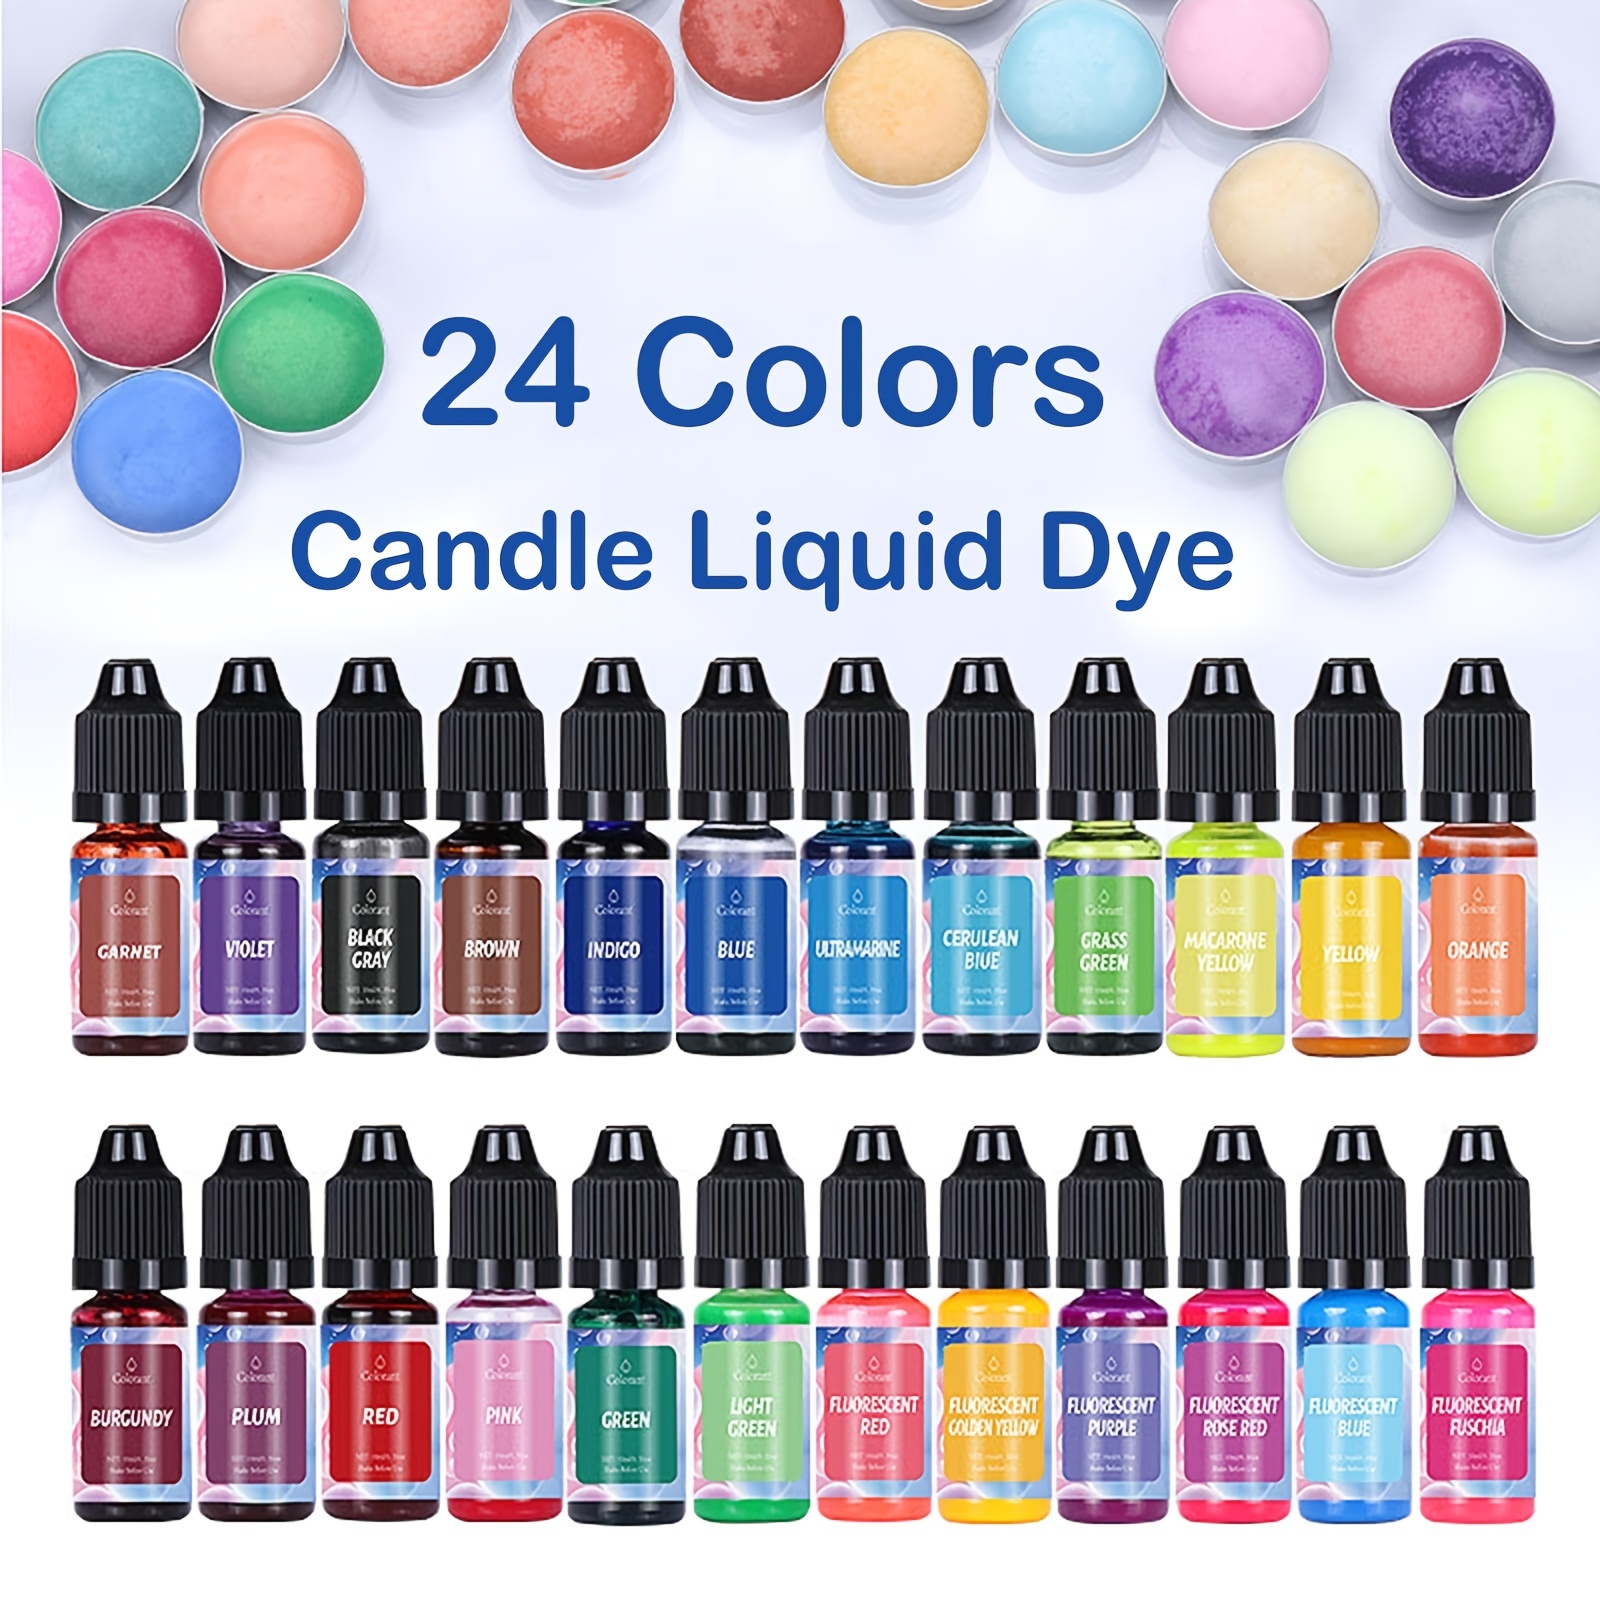 Candle Dyes For Candle Making - Wax Dyes For Candle Making - High